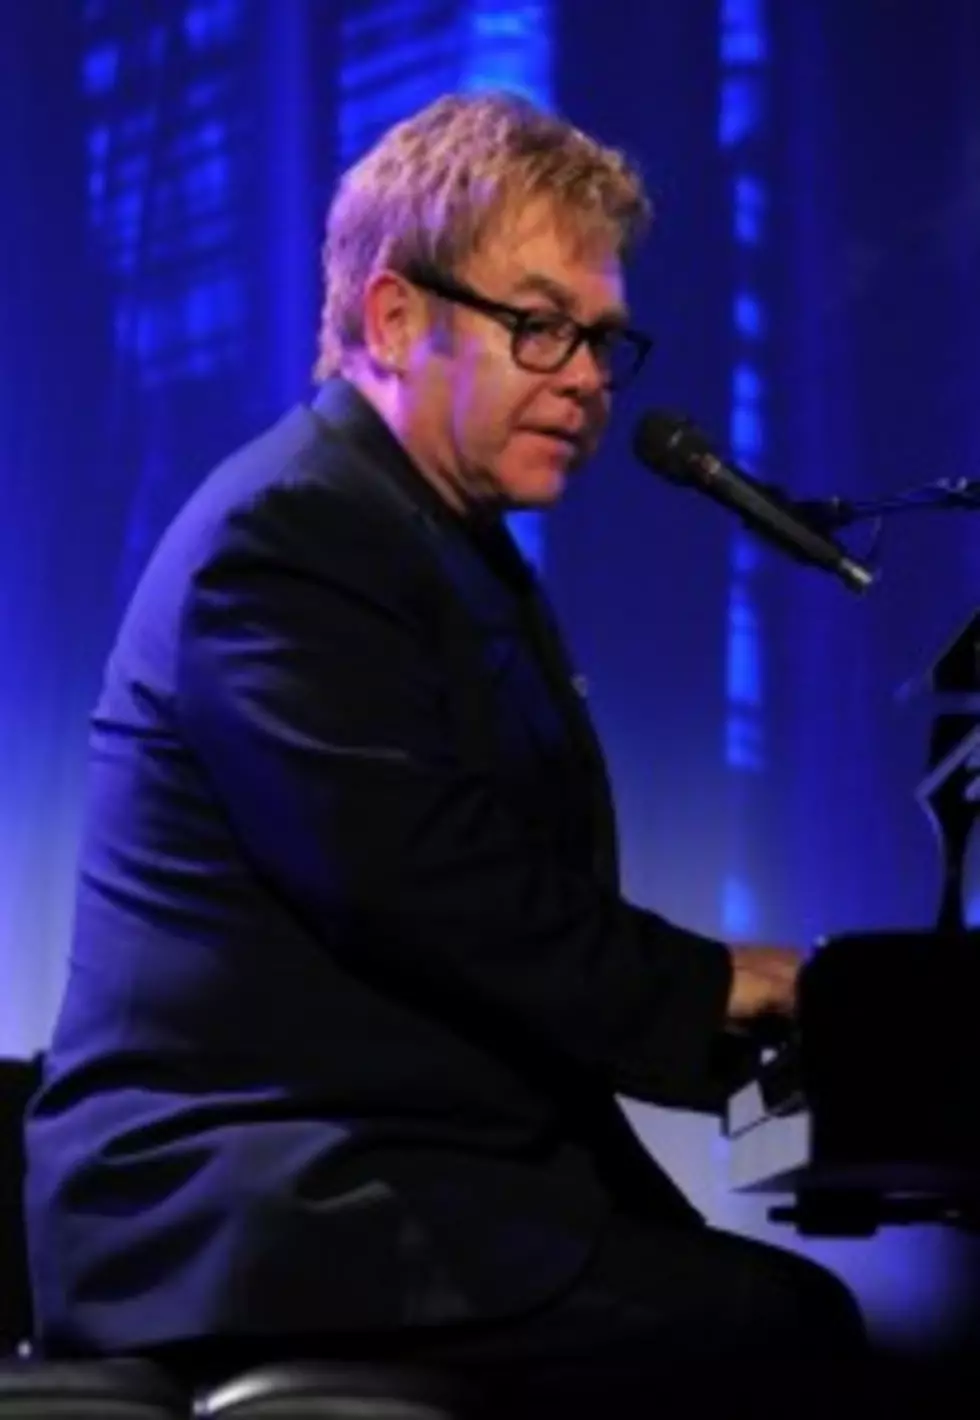 Movie On The Life Of Elton John In The Works